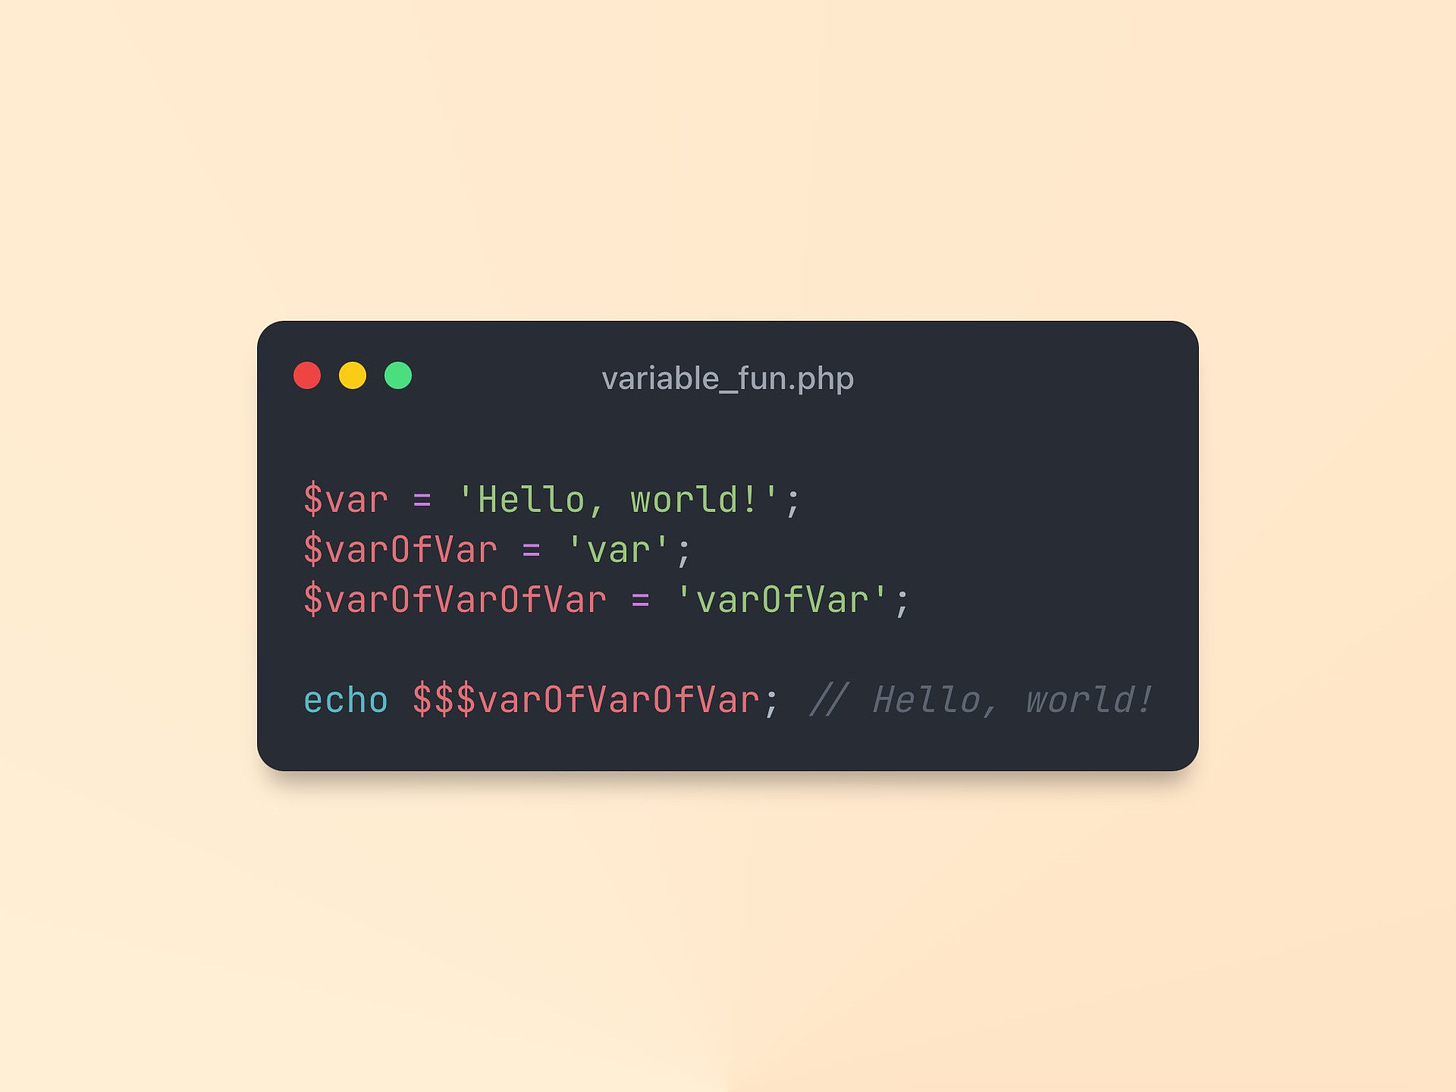 An example of PHP code that reads:

<?php

$var = 'Hello, world!';
$varOfVar = 'var';
$varOfVarOfVar = 'varOfVar';

echo $$$varOfVarOfVar; // Hello, world!